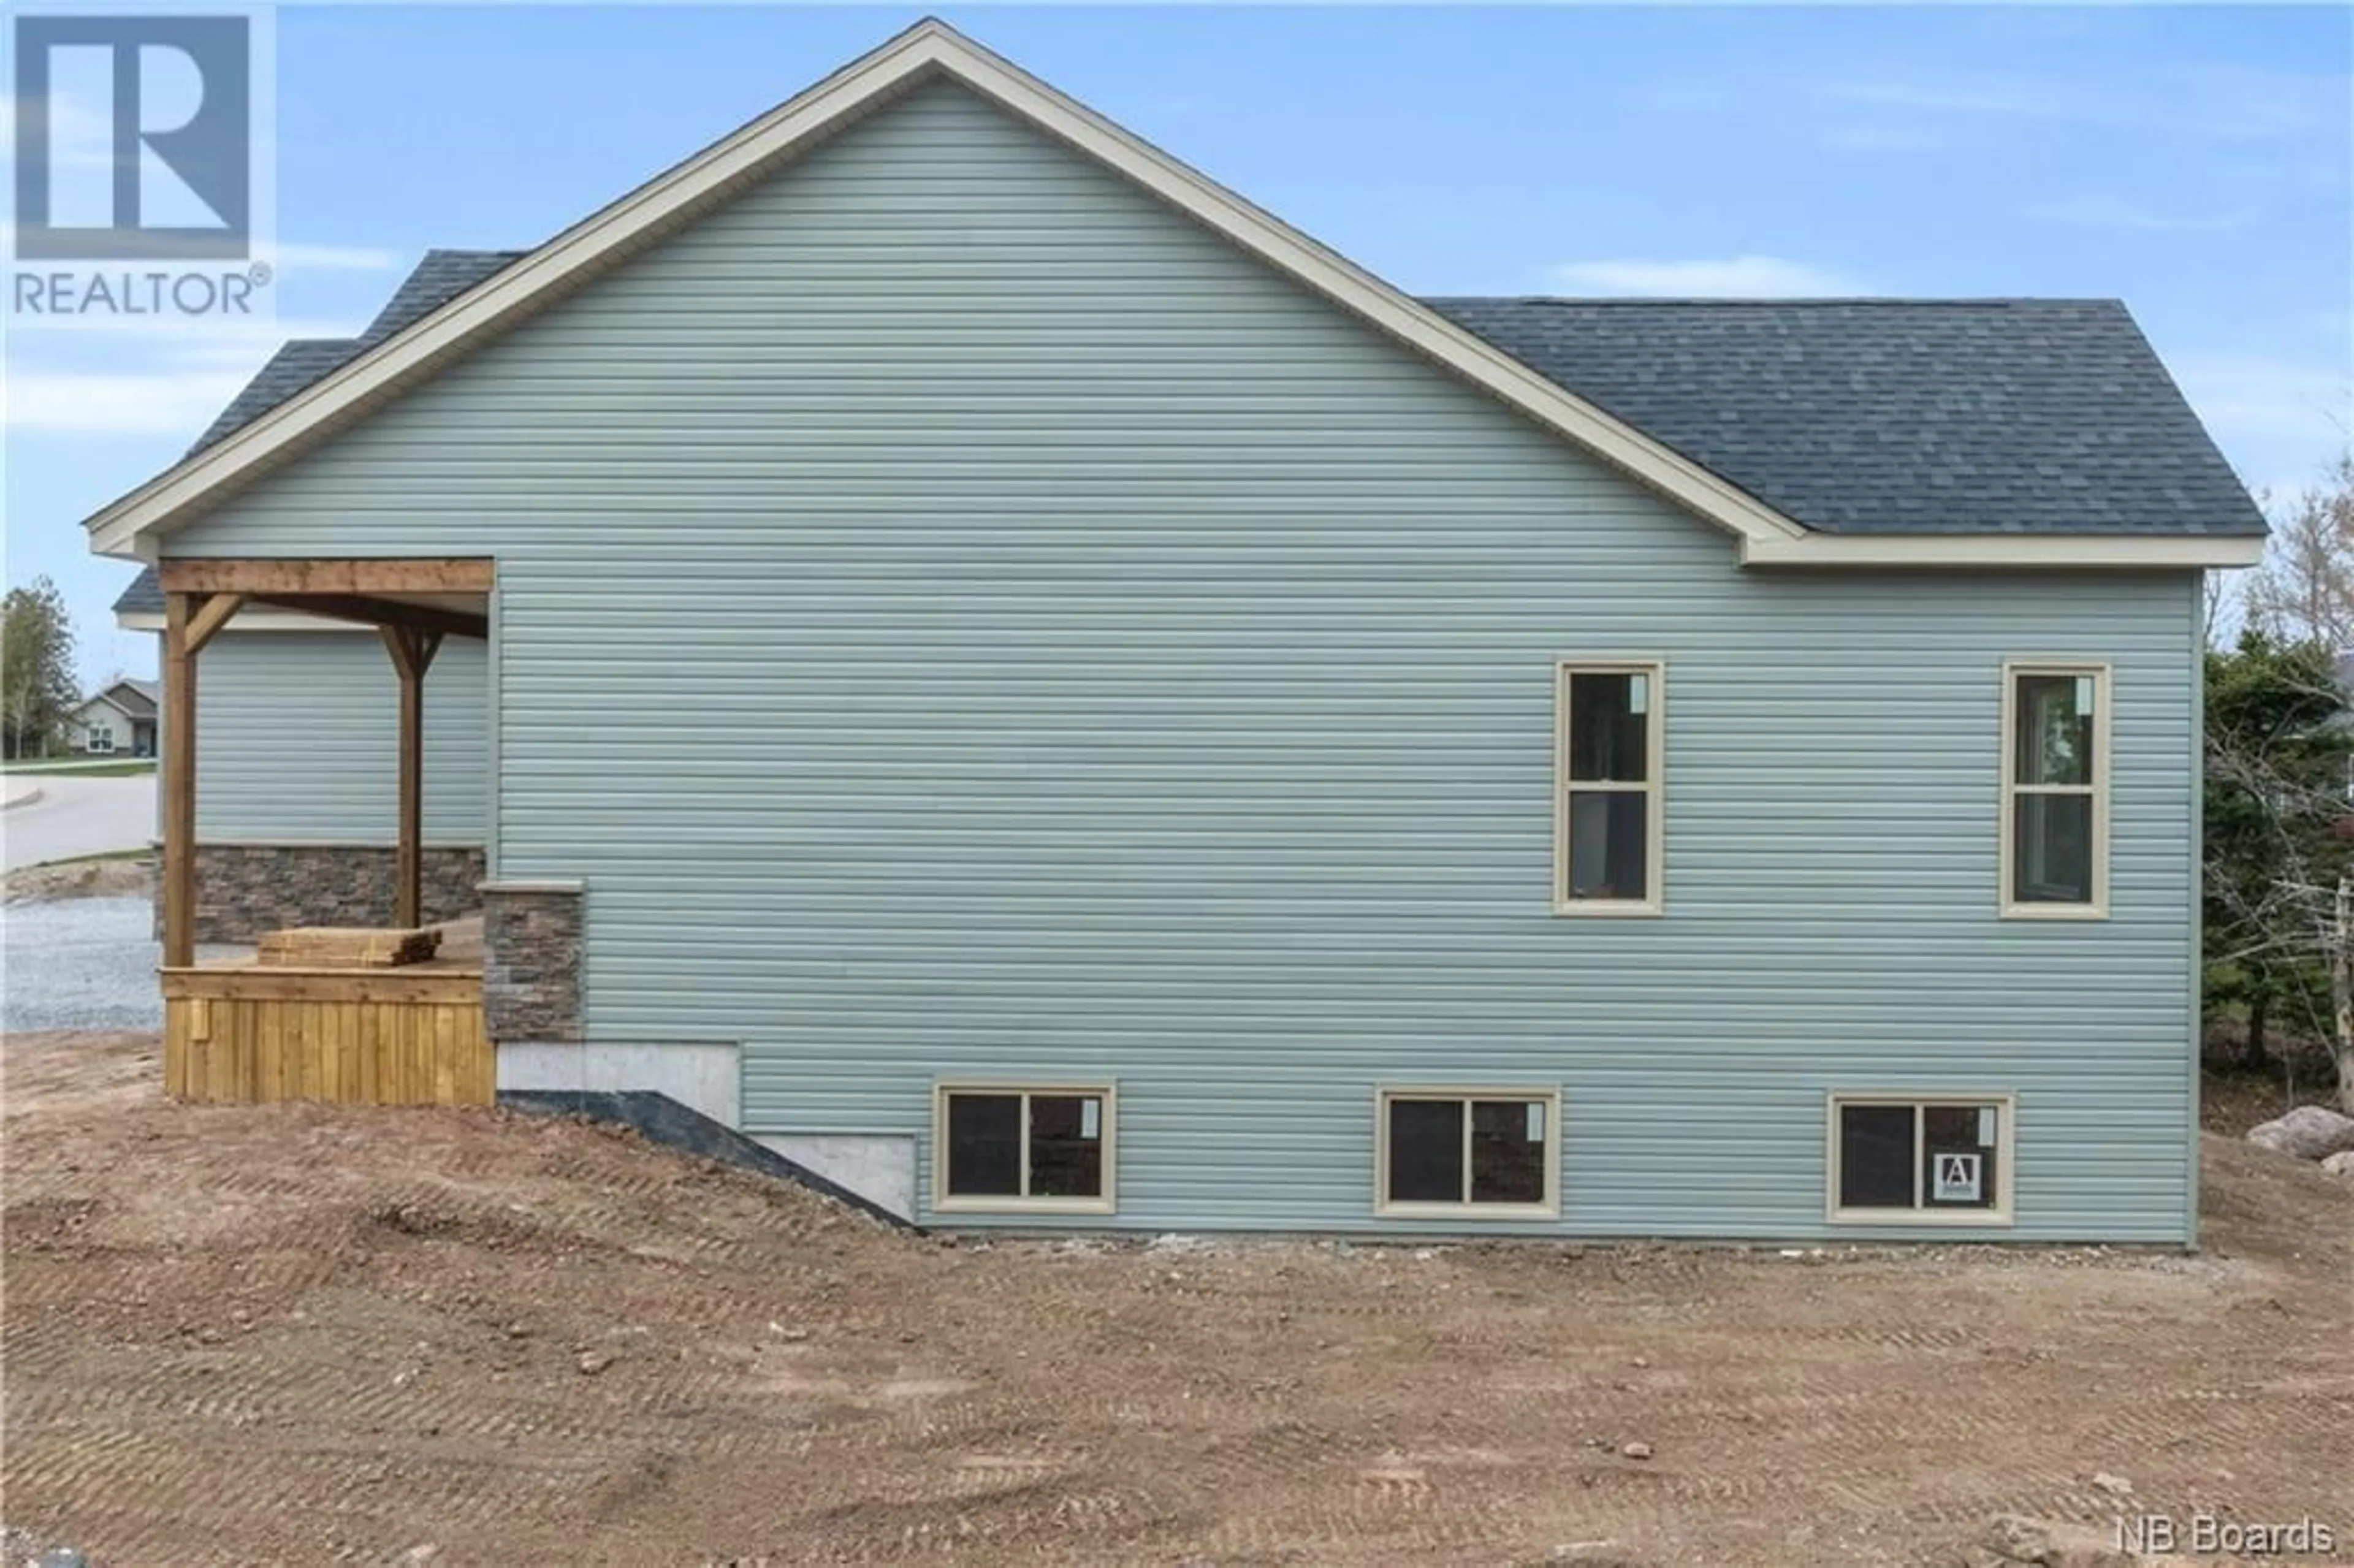 Home with vinyl exterior material for 11 Victoria Crescent, Rothesay New Brunswick E2E0S8